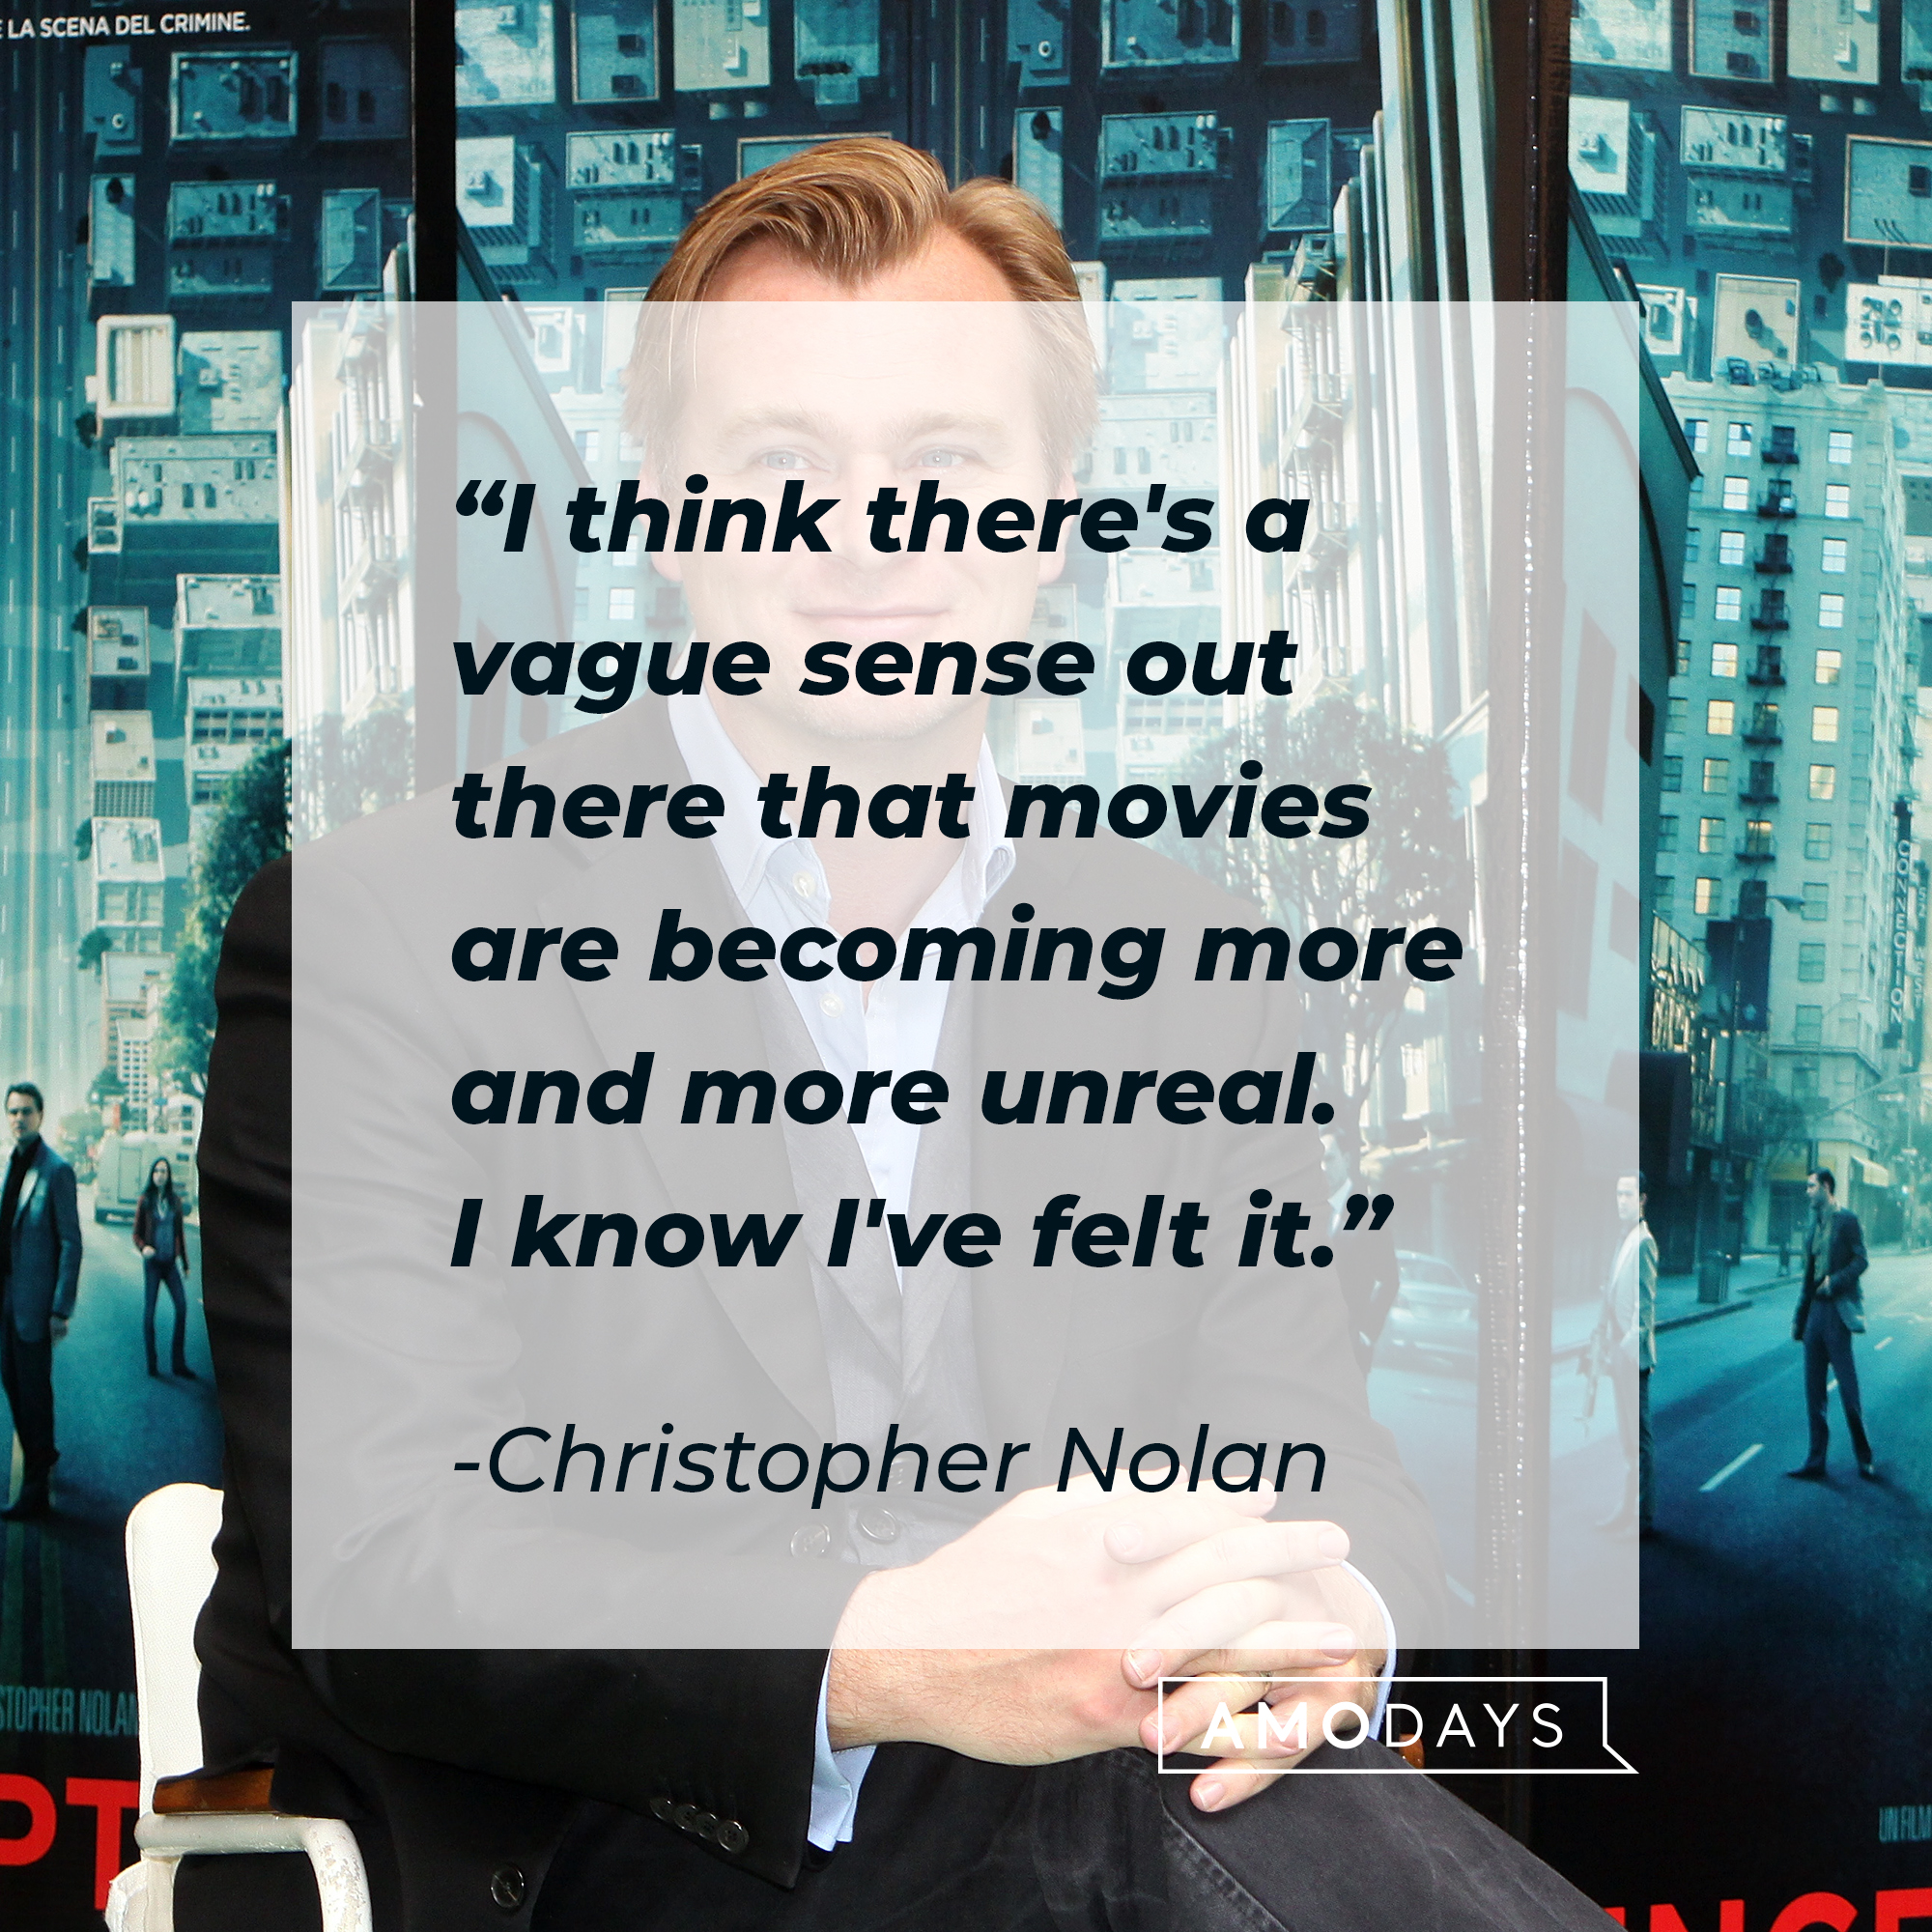 Christopher Nolan, with his quote:  “I think there's a vague sense out there that movies are becoming more and more unreal. I know I've felt it.”  | Source: Getty Images